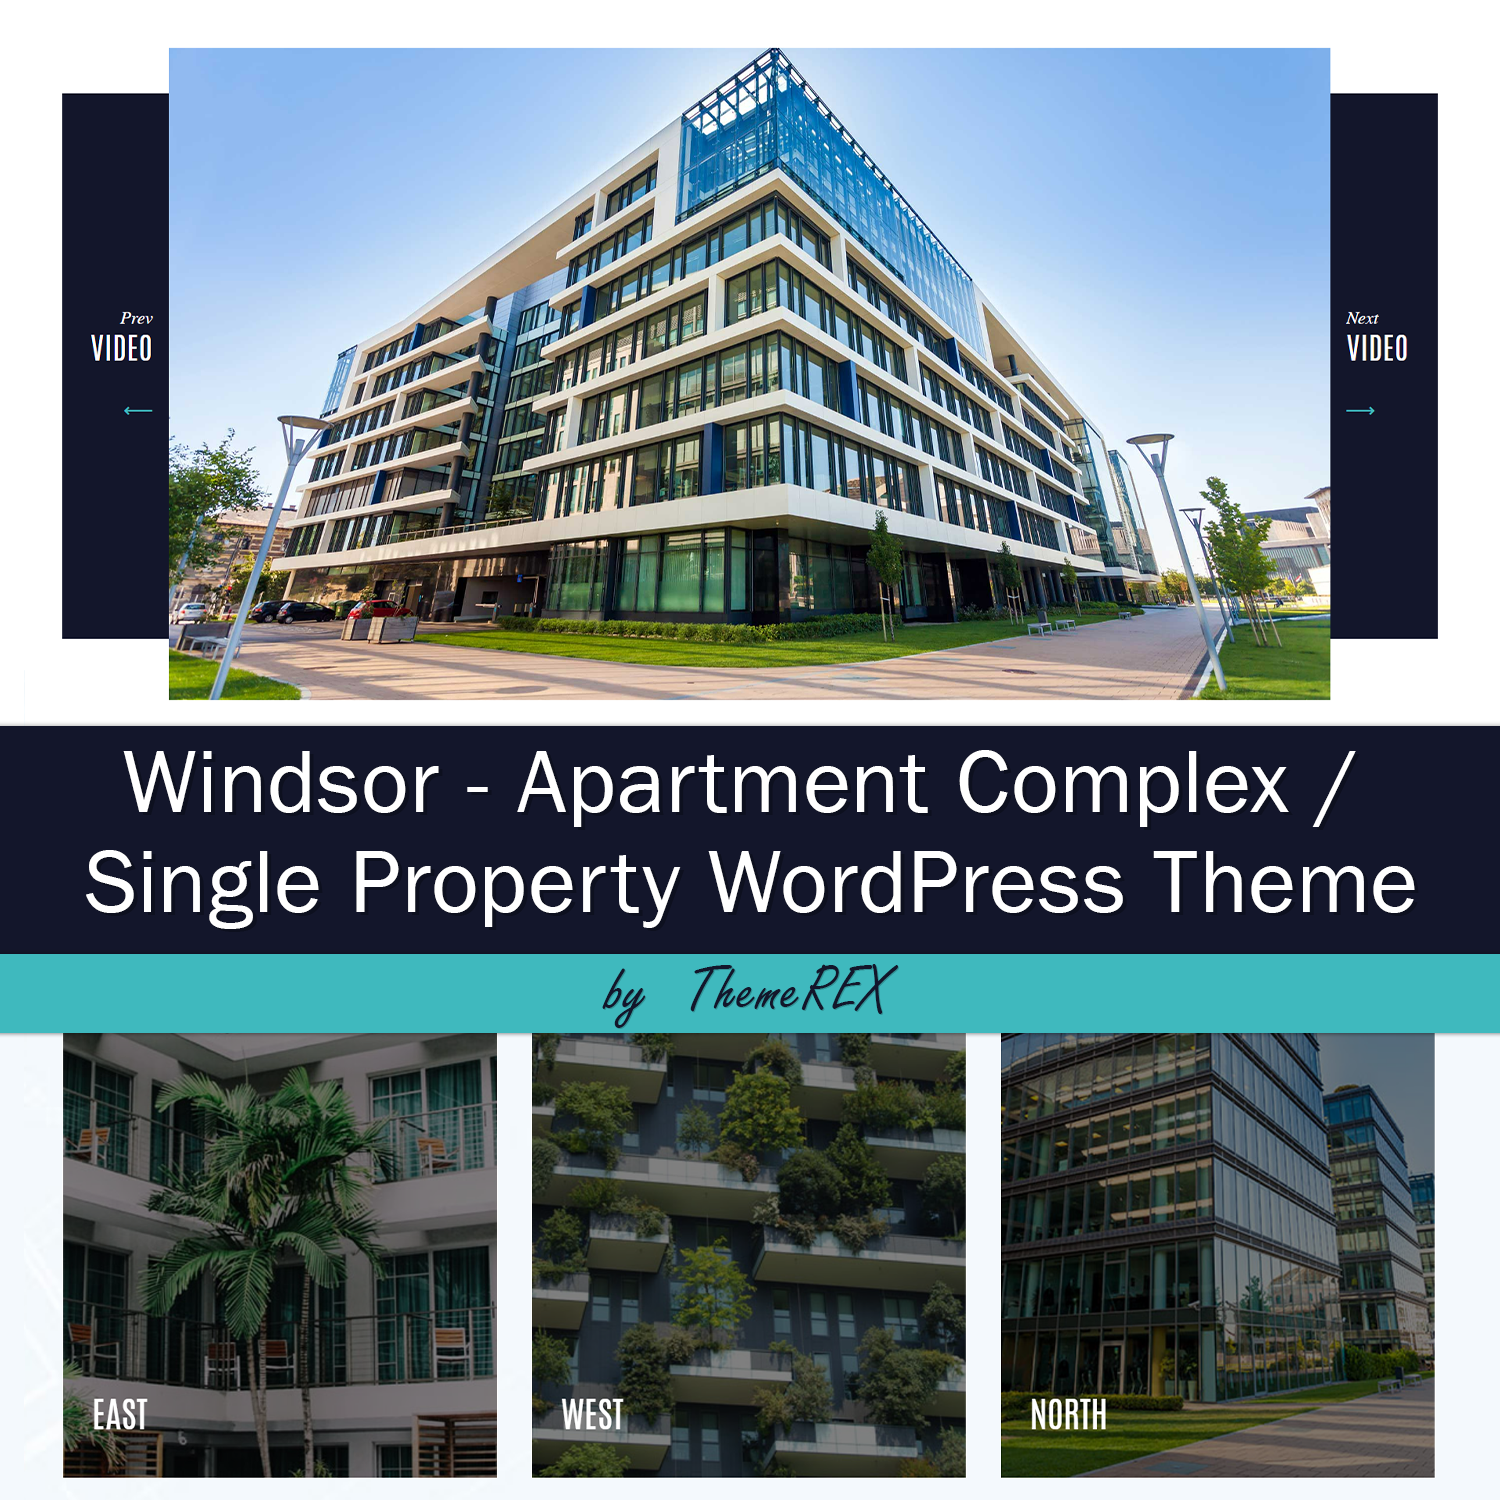 Preview windsor apartment complex single property wordpress theme.